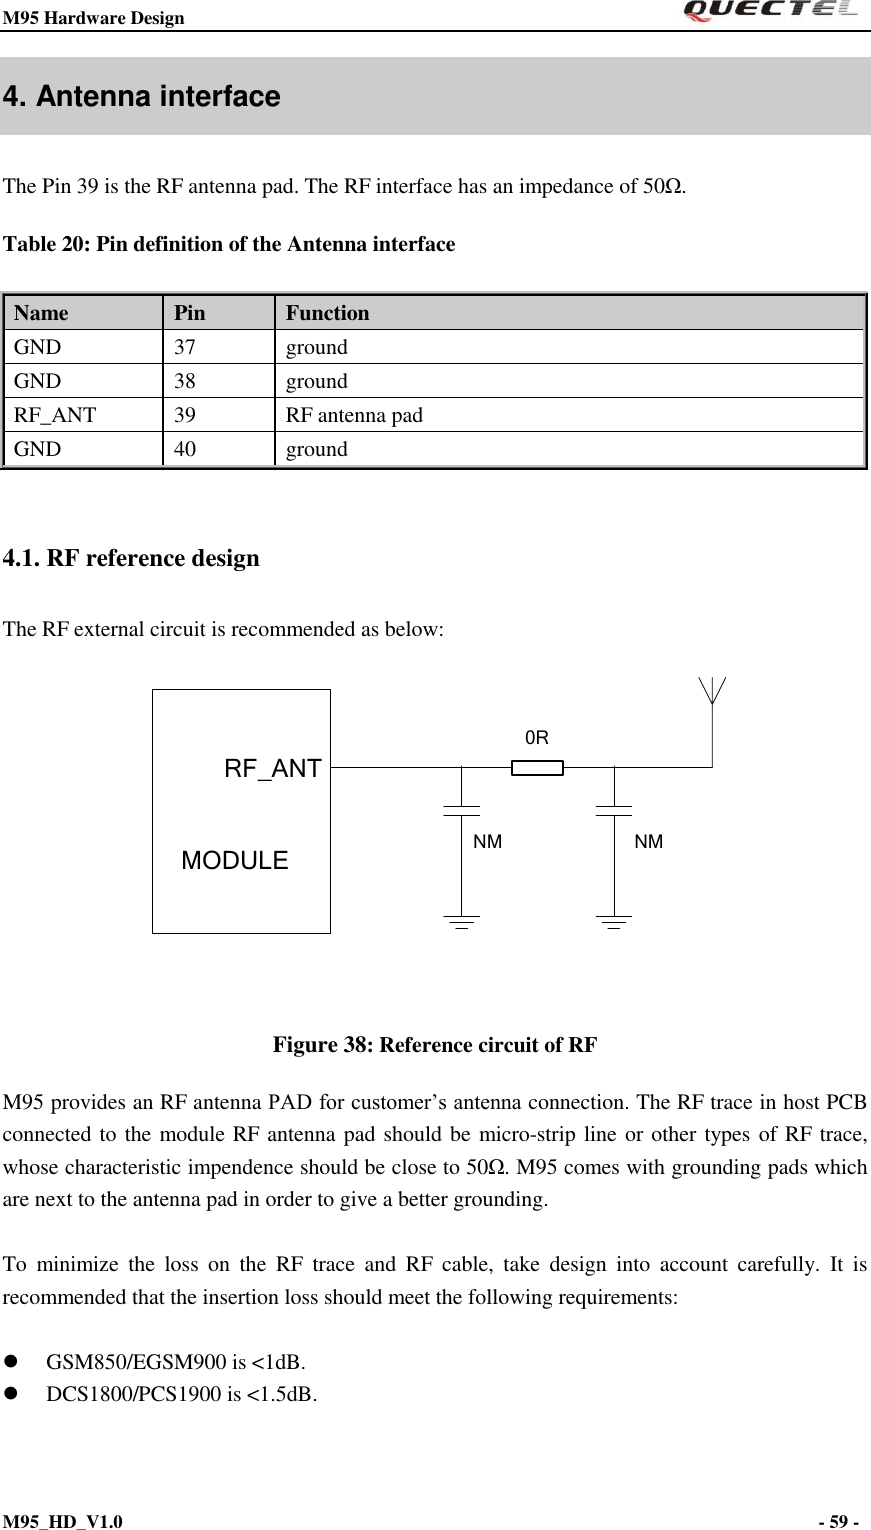 M95 Hardware Design                                                       M95_HD_V1.0                                                                - 59 -    4. Antenna interface The Pin 39 is the RF antenna pad. The RF interface has an impedance of 50Ω.   Table 20: Pin definition of the Antenna interface  4.1. RF reference design The RF external circuit is recommended as below: RF_ANT0RMODULE NMNM Figure 38: Reference circuit of RF M95 provides an RF antenna PAD for customer’s antenna connection. The RF trace in host PCB connected to the module RF antenna pad should be micro-strip line or other types of RF trace, whose characteristic impendence should be close to 50Ω. M95 comes with grounding pads which are next to the antenna pad in order to give a better grounding.    To  minimize  the  loss  on  the  RF  trace  and  RF  cable,  take  design  into  account  carefully.  It  is recommended that the insertion loss should meet the following requirements:   GSM850/EGSM900 is &lt;1dB.    DCS1800/PCS1900 is &lt;1.5dB. Name   Pin   Function GND 37 ground GND 38 ground RF_ANT 39 RF antenna pad GND 40 ground 